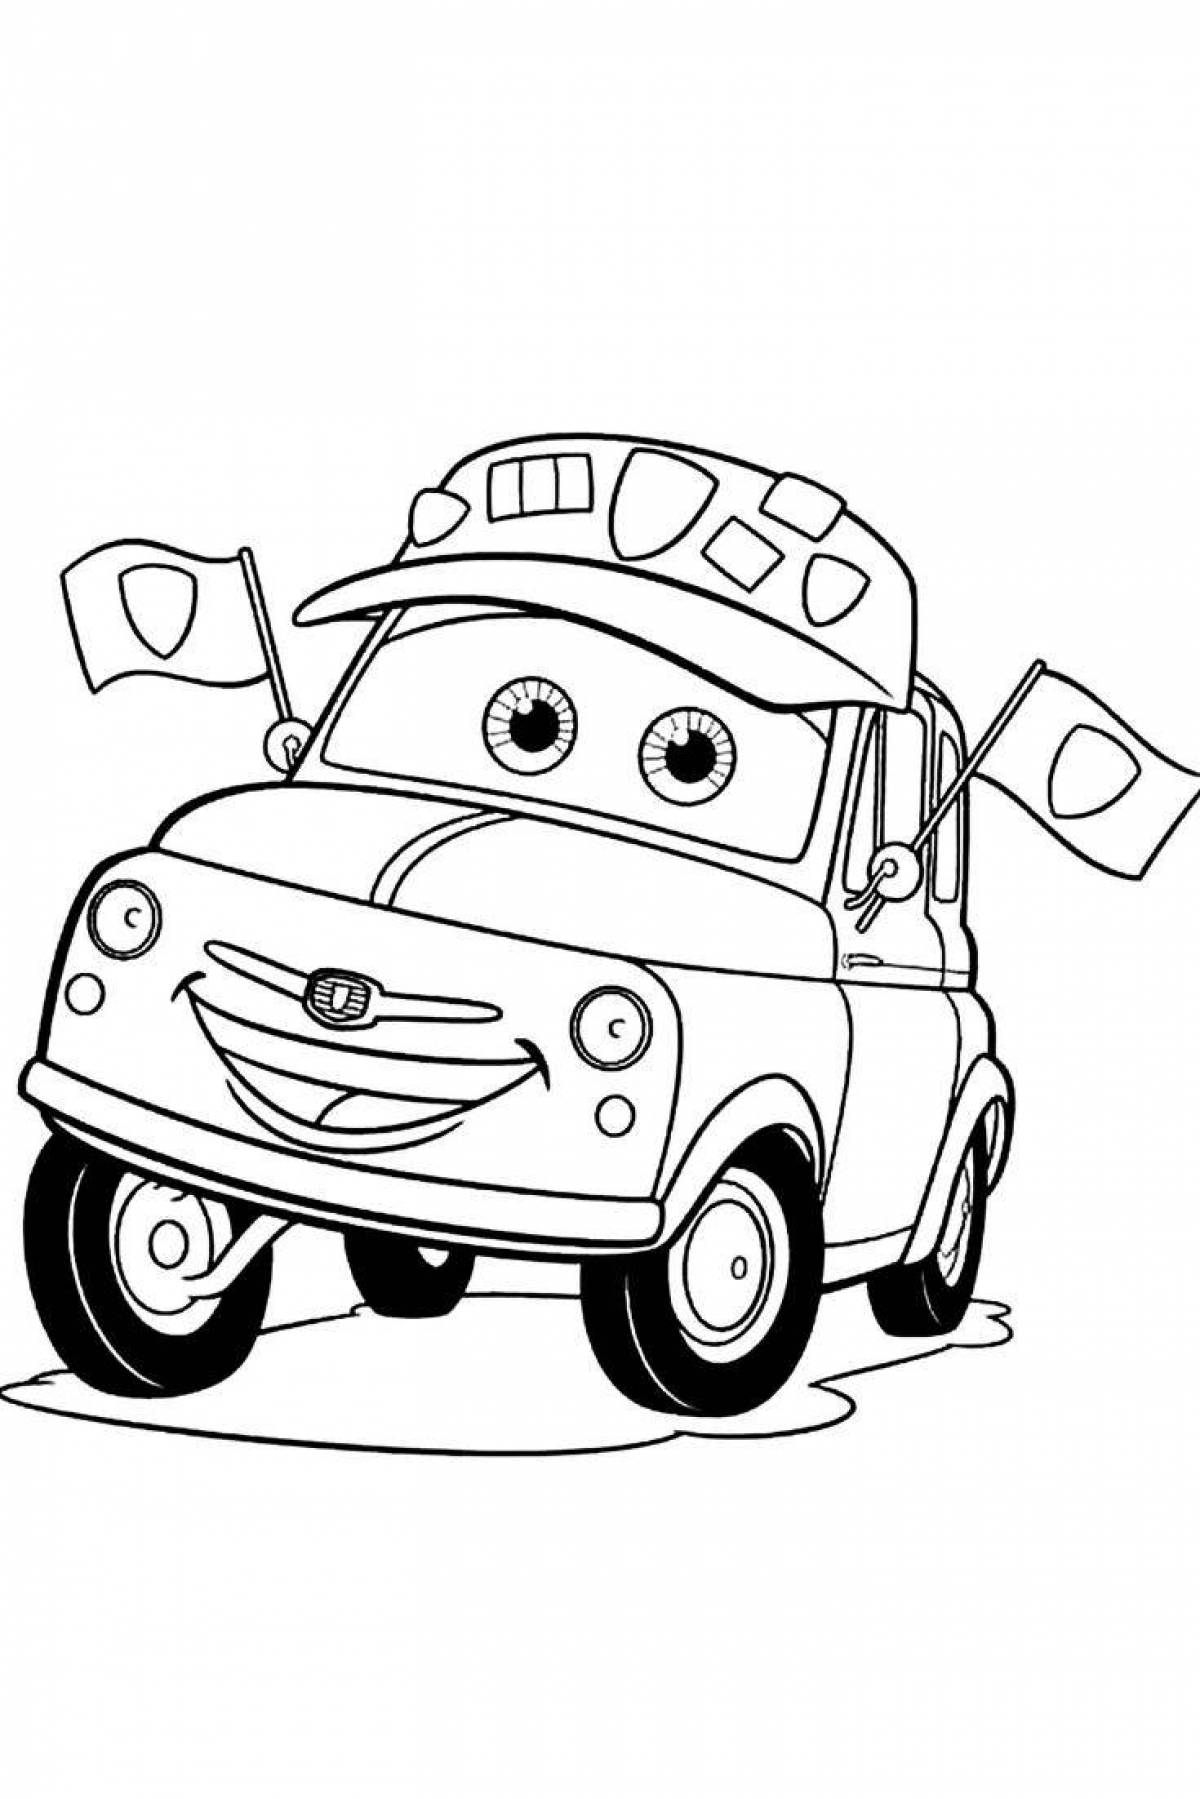 Coloring cartoon colorful cars